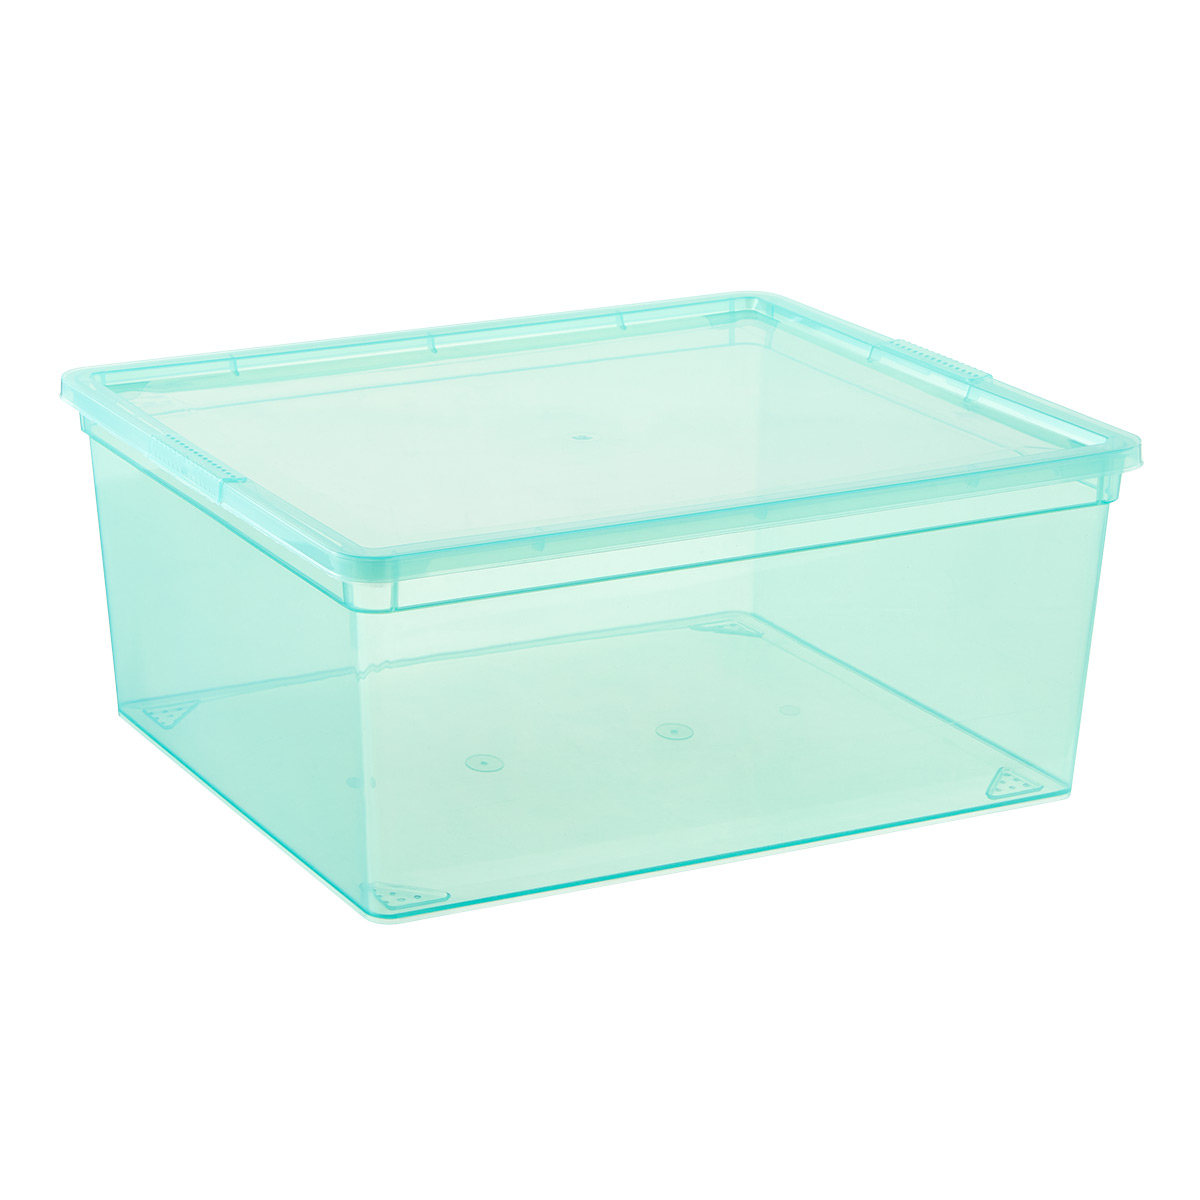 The Container Store Our Jumbo Box - 27-1/8 x 16 x 12-3/8 H - Each